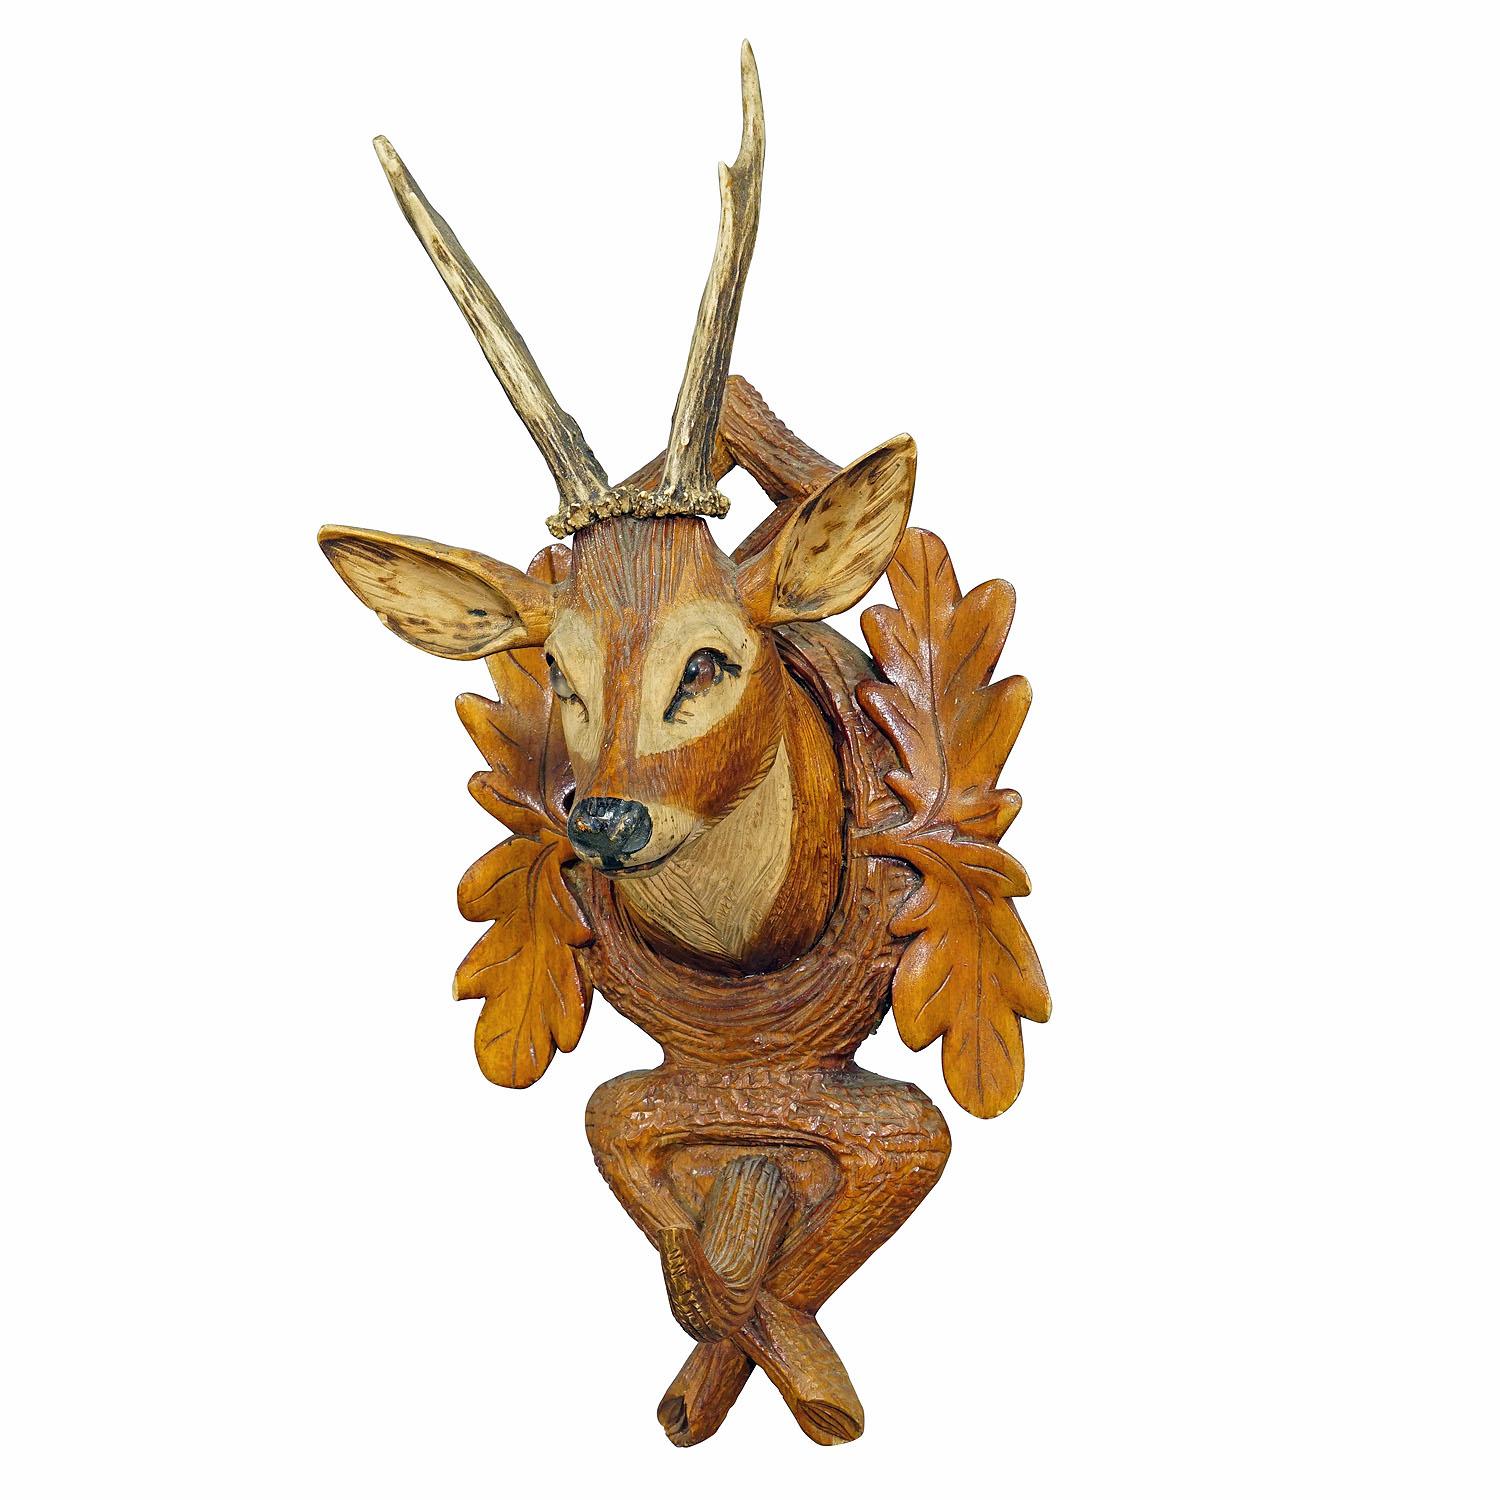 Black Forest Rustic Carved Wooden Coat Hook with Deer

A nice handcarved whip holder or coat rack featuring a wooden carved deer head with real deer tropies. A classical carving art made in Brienz, Switzerland circa 1920. The antique whip holder is